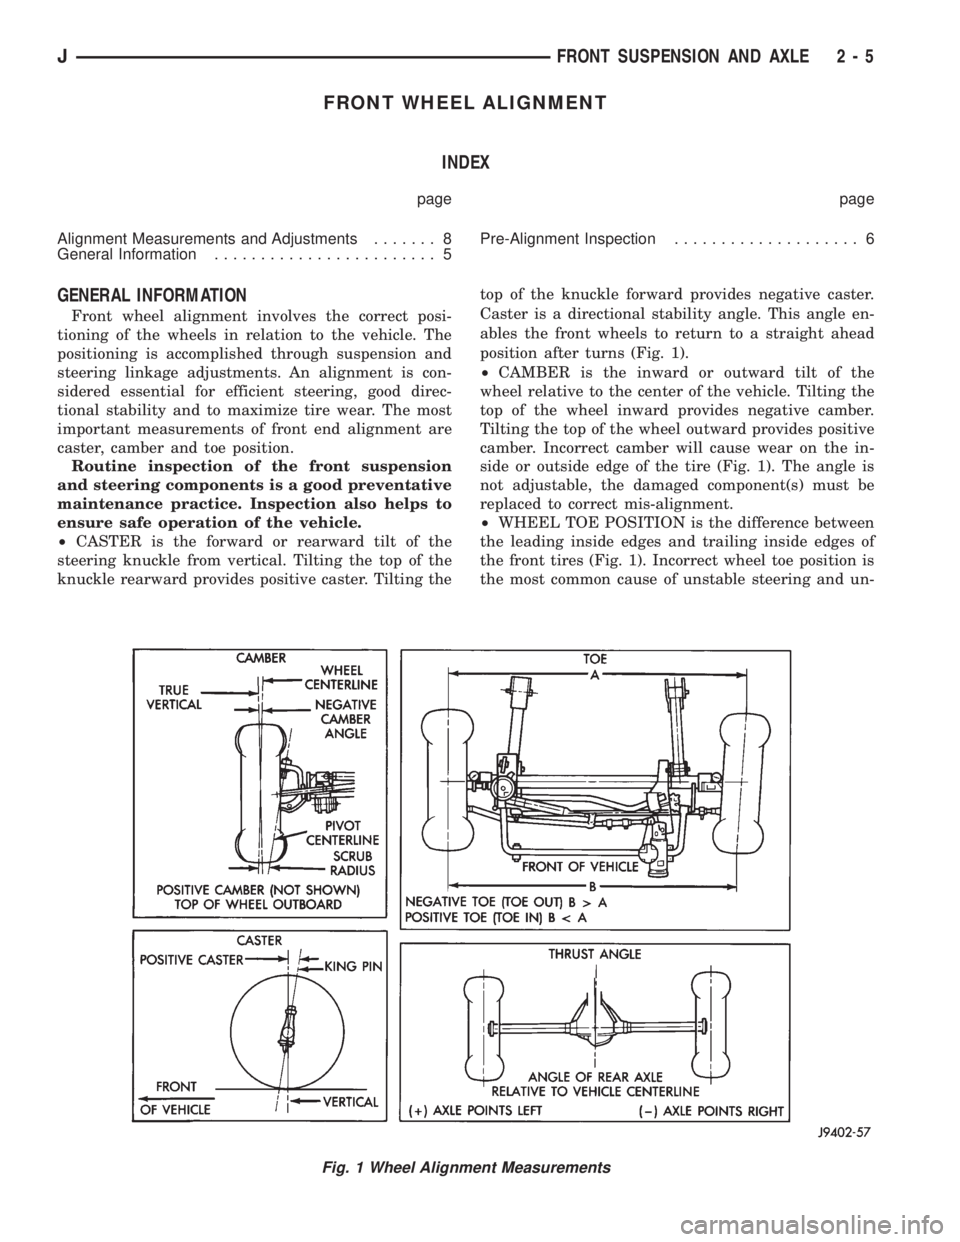 JEEP XJ 1995  Service And Repair Manual FRONT WHEEL ALIGNMENT
INDEX
page page
Alignment Measurements and Adjustments....... 8
General Information........................ 5Pre-Alignment Inspection.................... 6
GENERAL INFORMATION
Fr